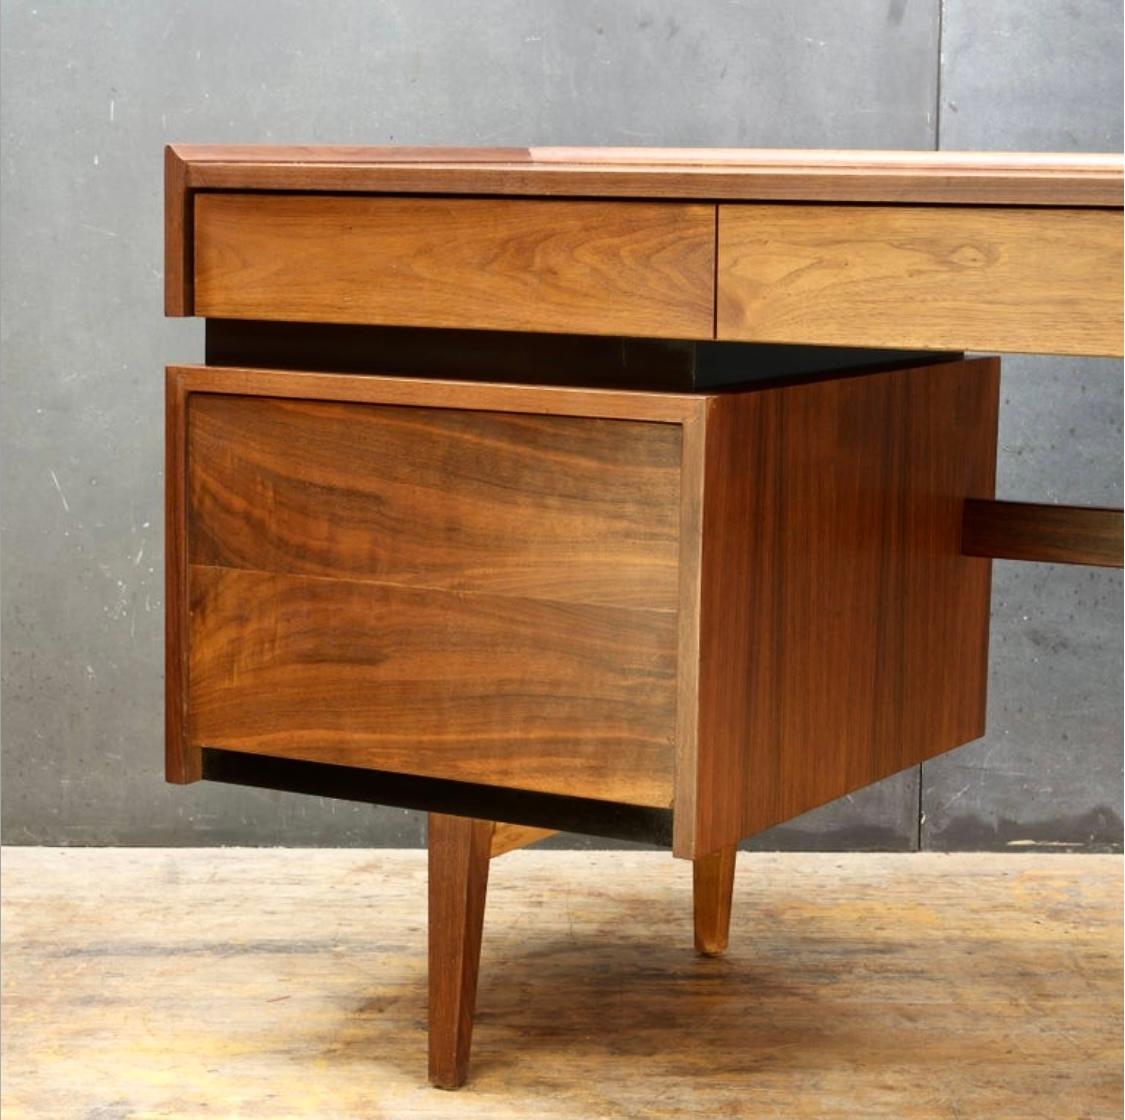 Merton Gershun was an American furniture designer of the early 20th century, known for designing some of the earliest modern furniture lines available in the U.S. and striving to bring chic, modern design to the every-day American consumer.Desk in